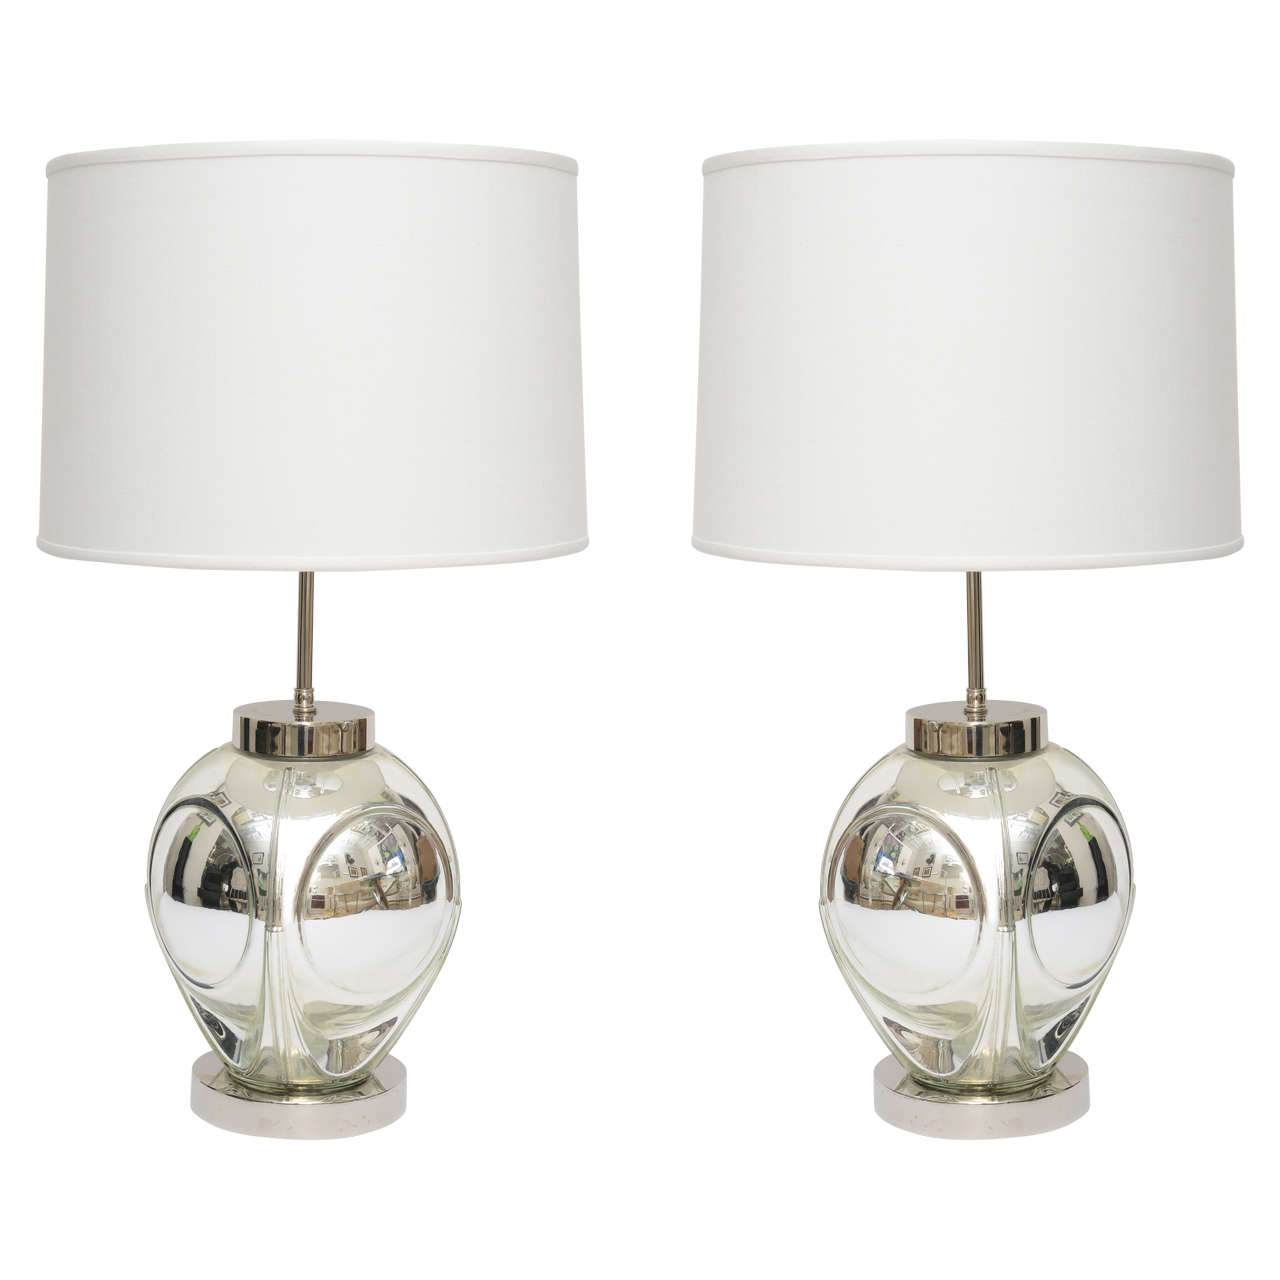 Pair of  Mid-Century Modern, Polished Chrome and Mercury Glass Table Lamps